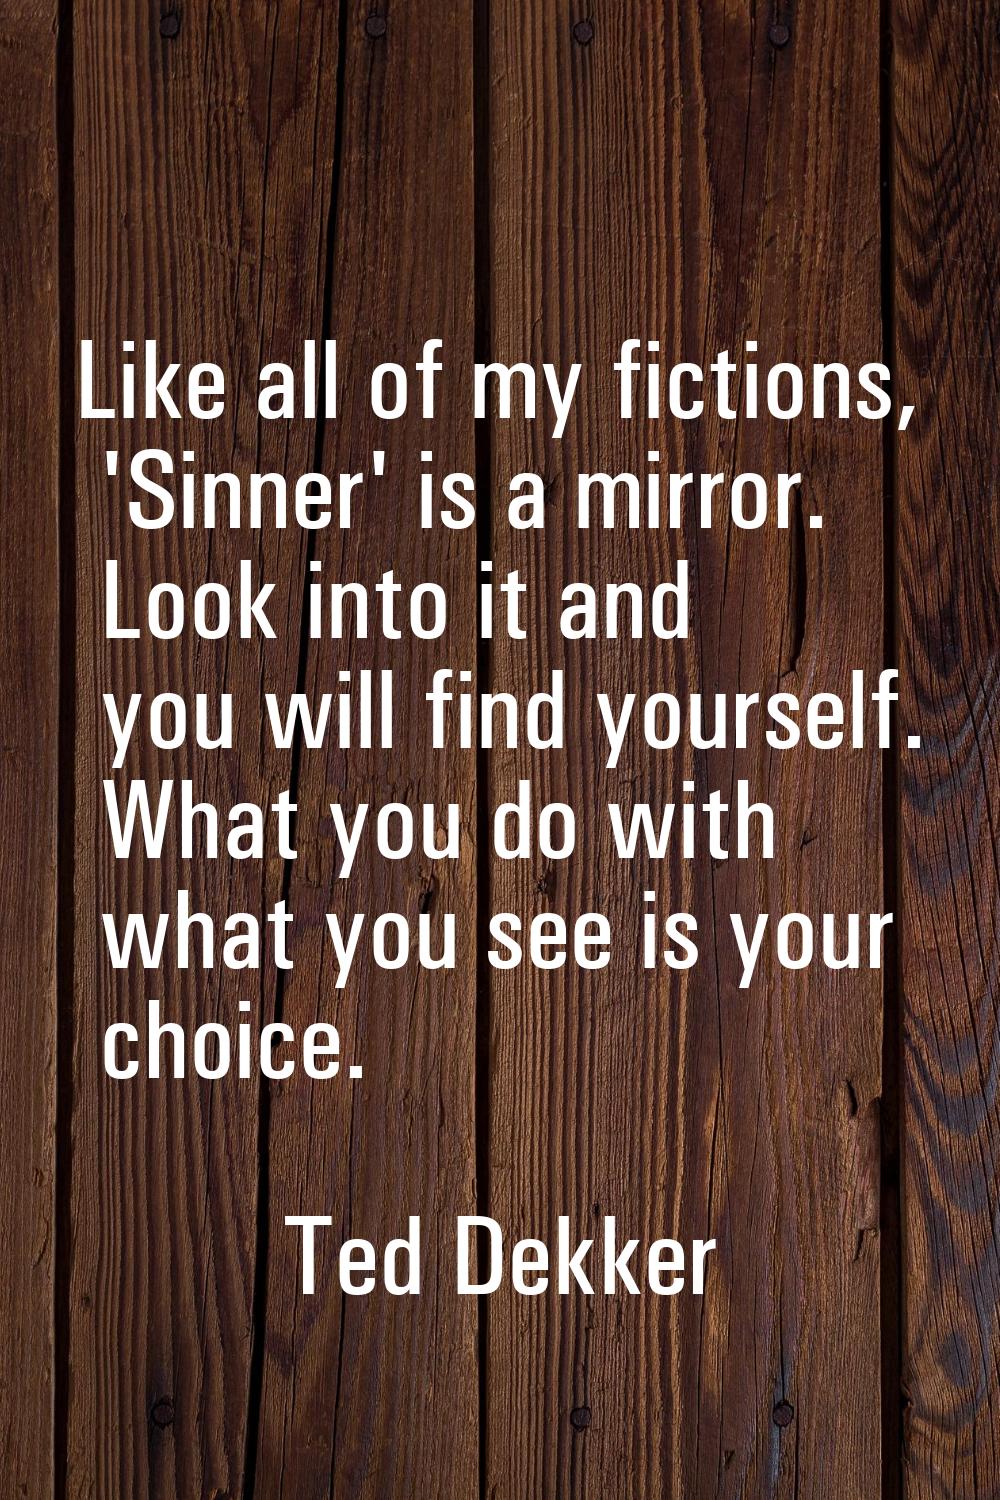 Like all of my fictions, 'Sinner' is a mirror. Look into it and you will find yourself. What you do